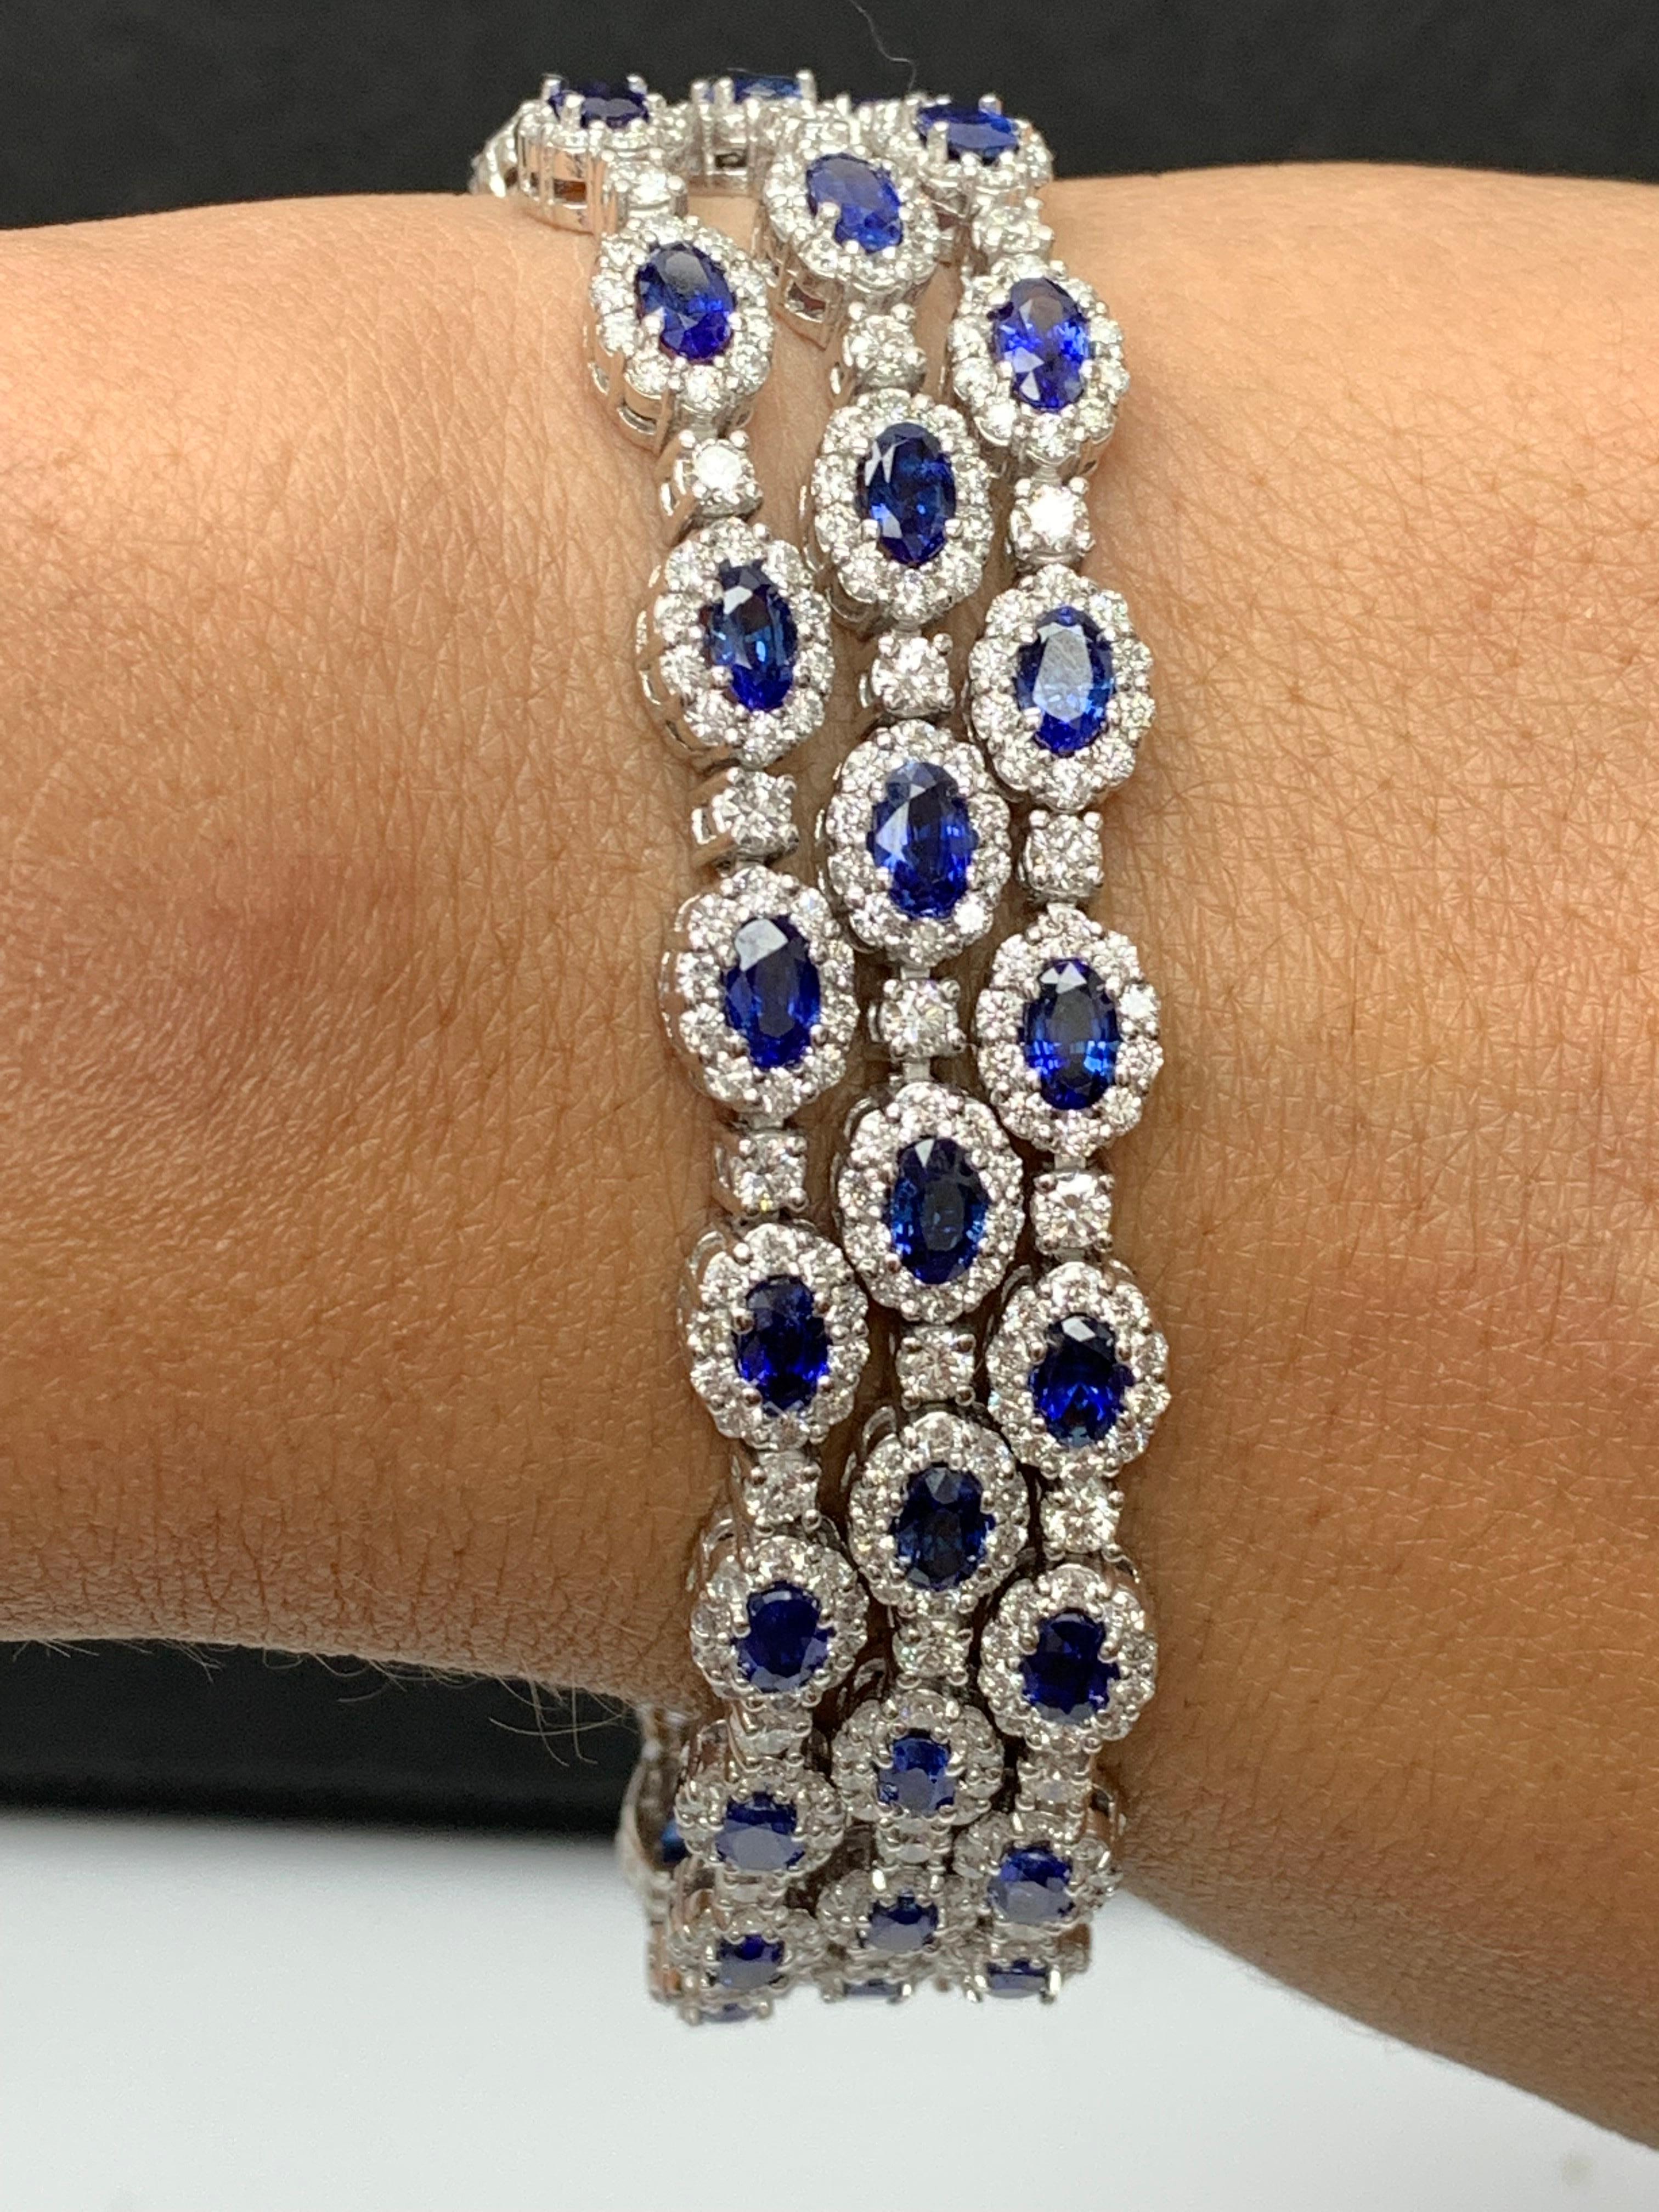 A beautiful Blue Sapphire and Diamond 3-row bracelet showcasing color-rich blue sapphires, surrounded by a single row of brilliant round diamonds. 51 Oval cut blue sapphires weigh 14.95 carats total; 561 accent diamonds weigh 10.97 carats total.